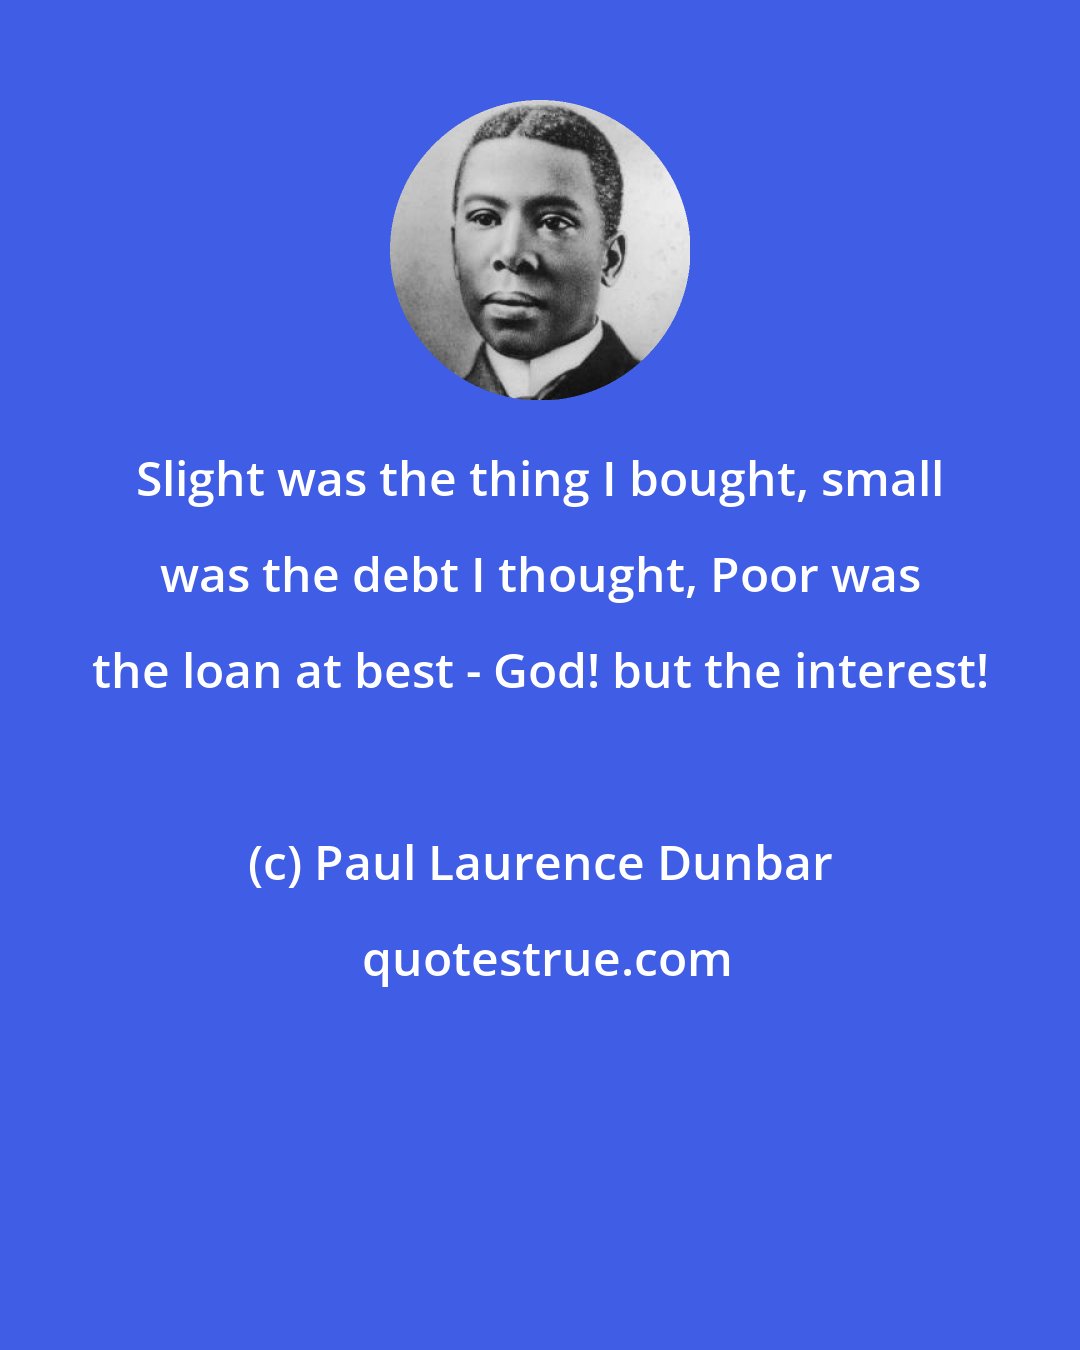 Paul Laurence Dunbar: Slight was the thing I bought, small was the debt I thought, Poor was the loan at best - God! but the interest!